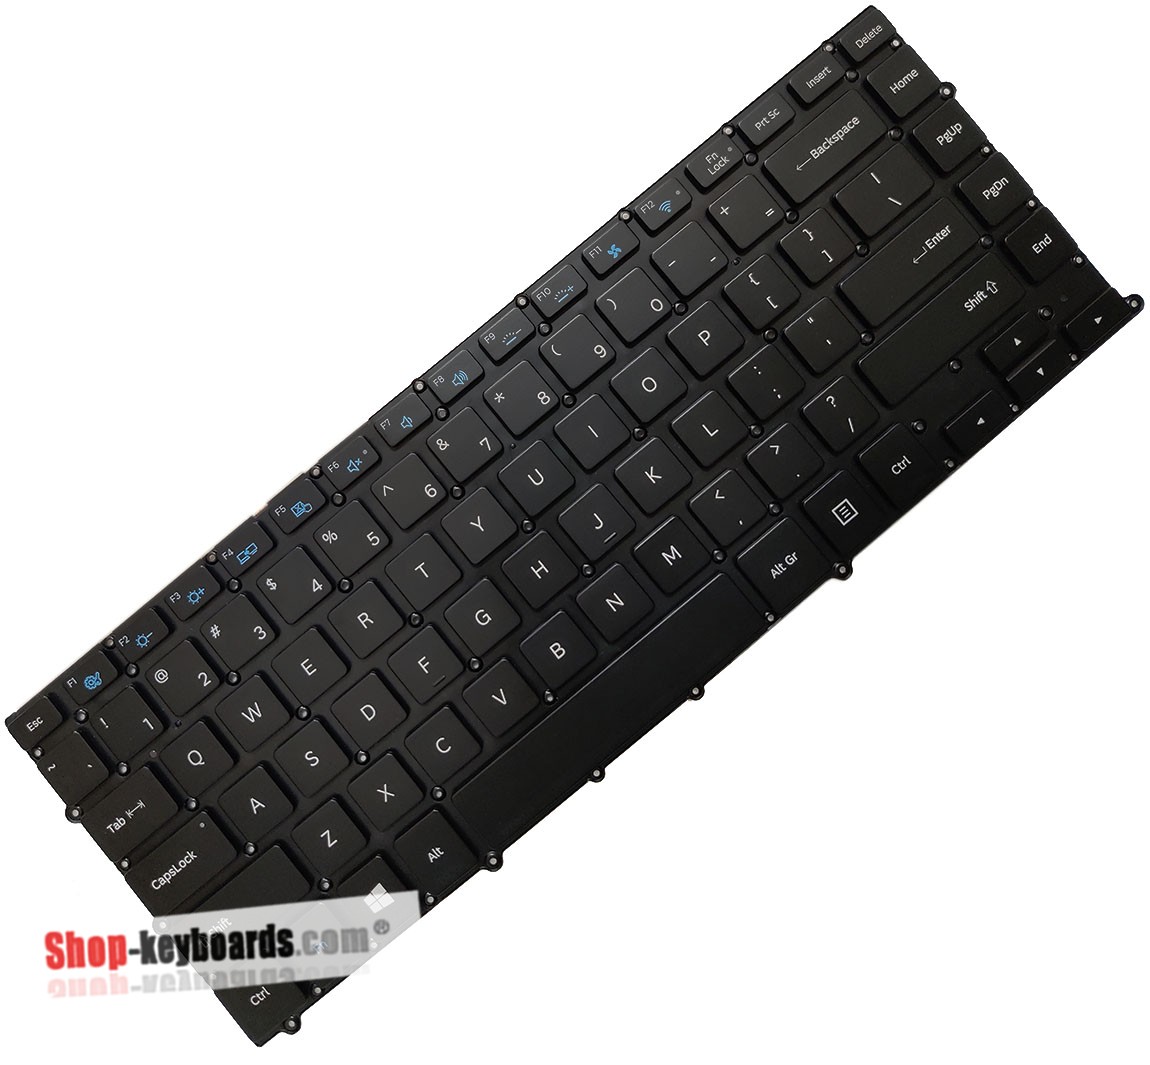 Samsung NT900X4D-K01AU  Keyboard replacement